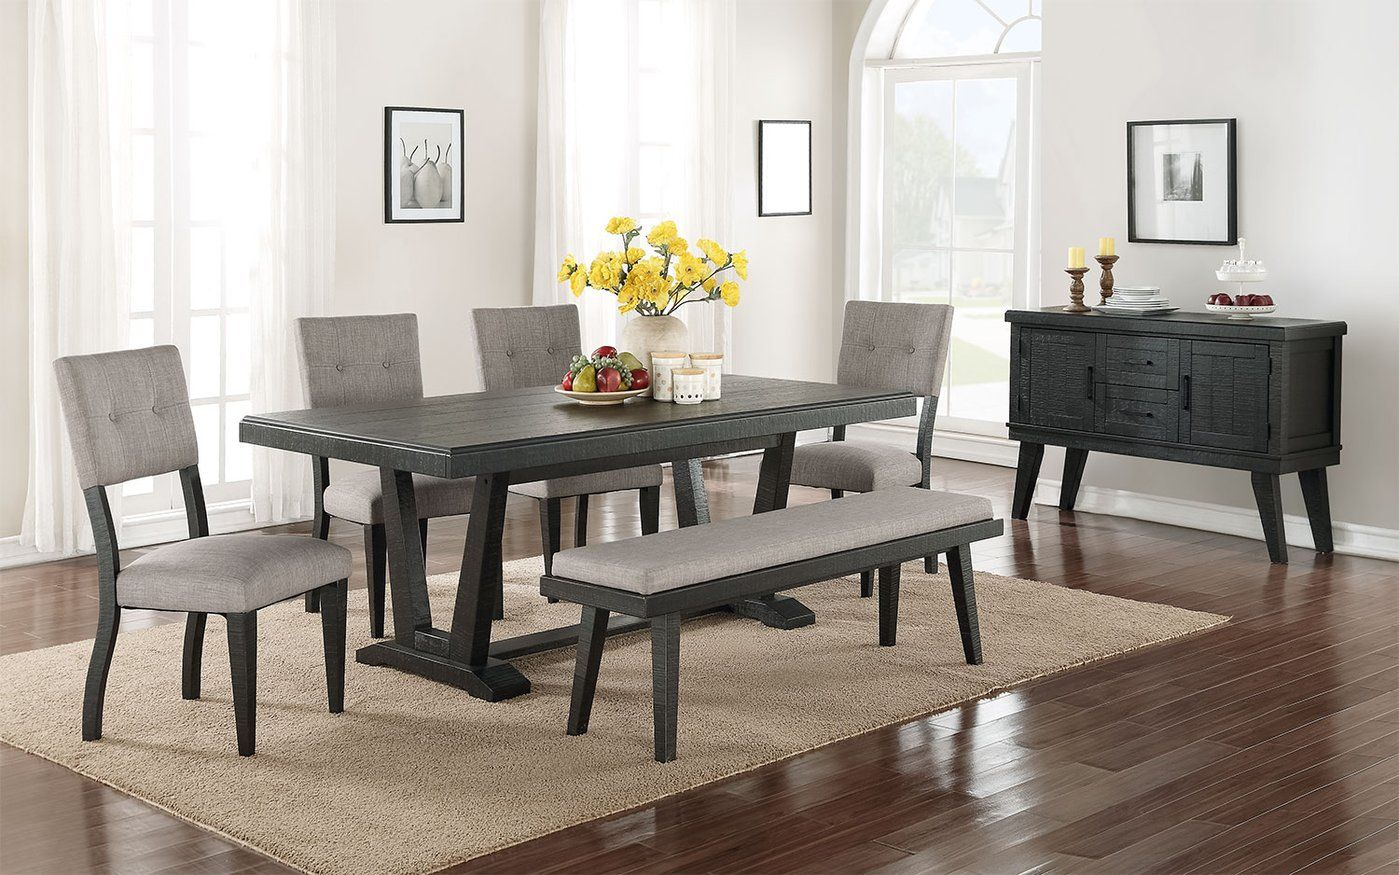 Imari 7 Piece Dining Room Set Black And Grey Black intended for size 1399 X 875